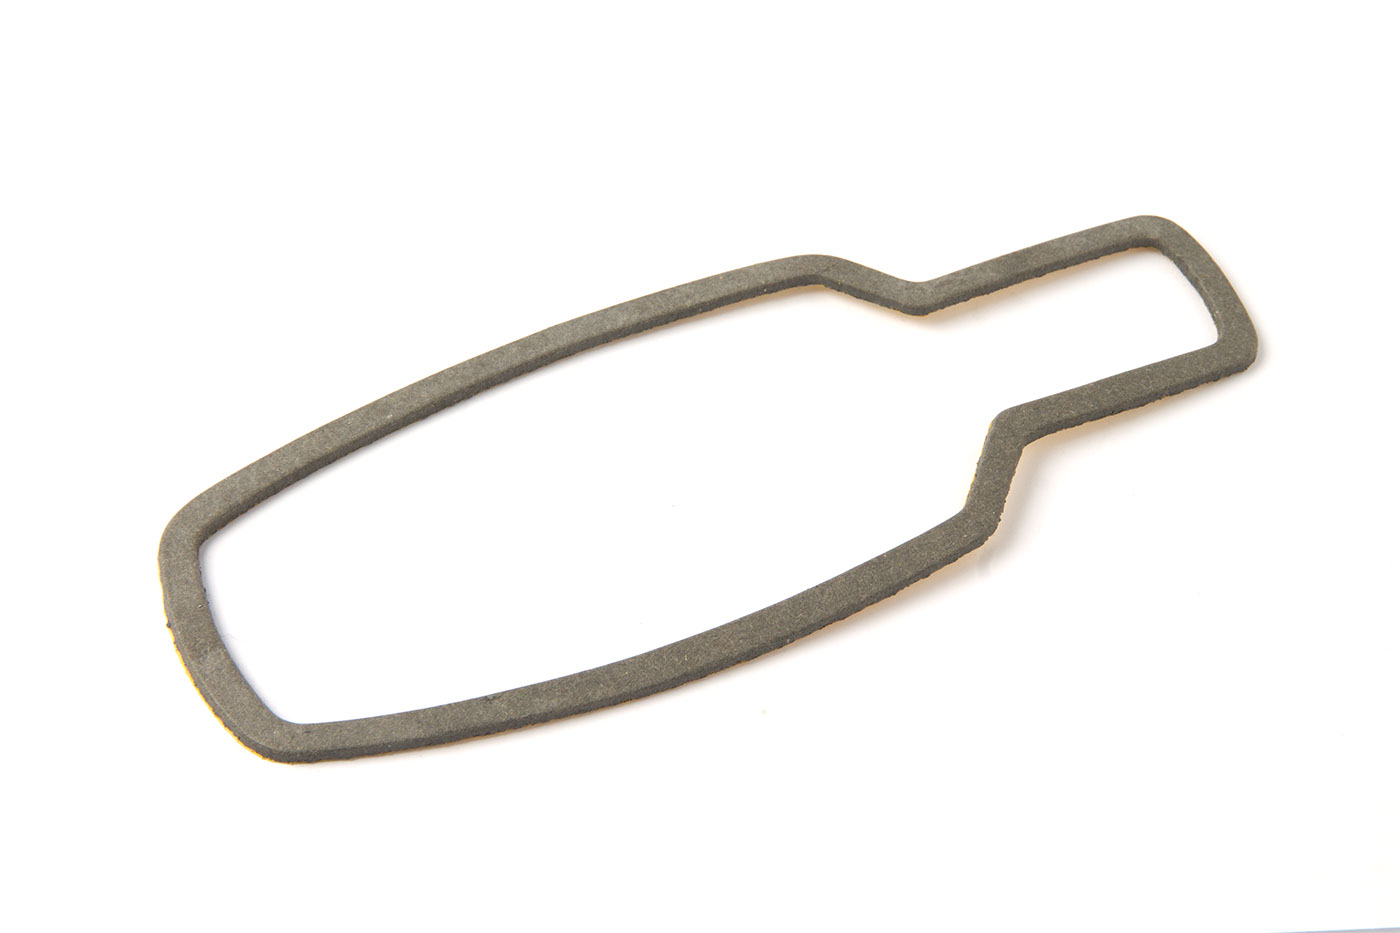 Dichtung
Gasket
Joint